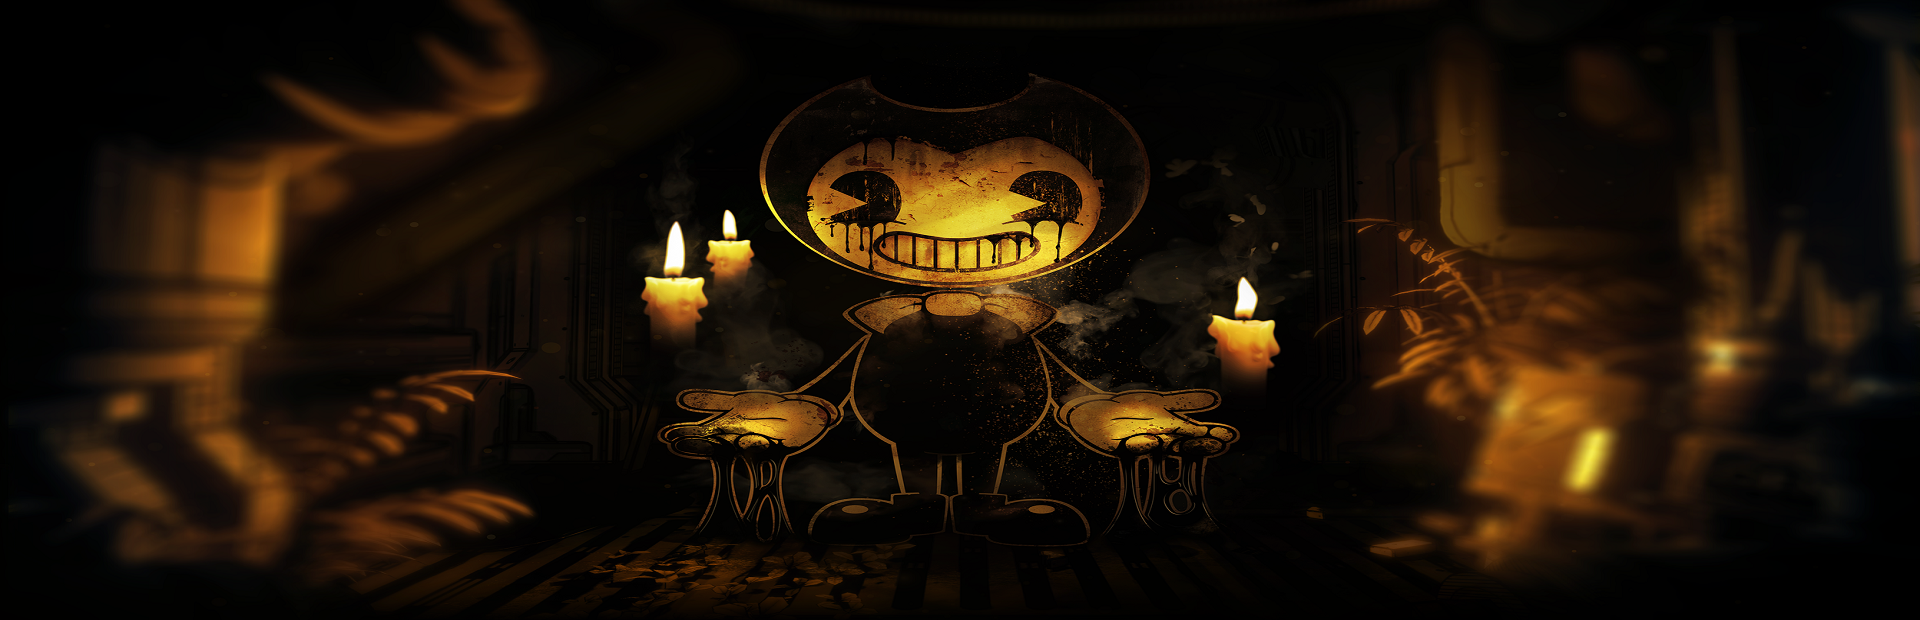 Bendy and the Dark Revival PC